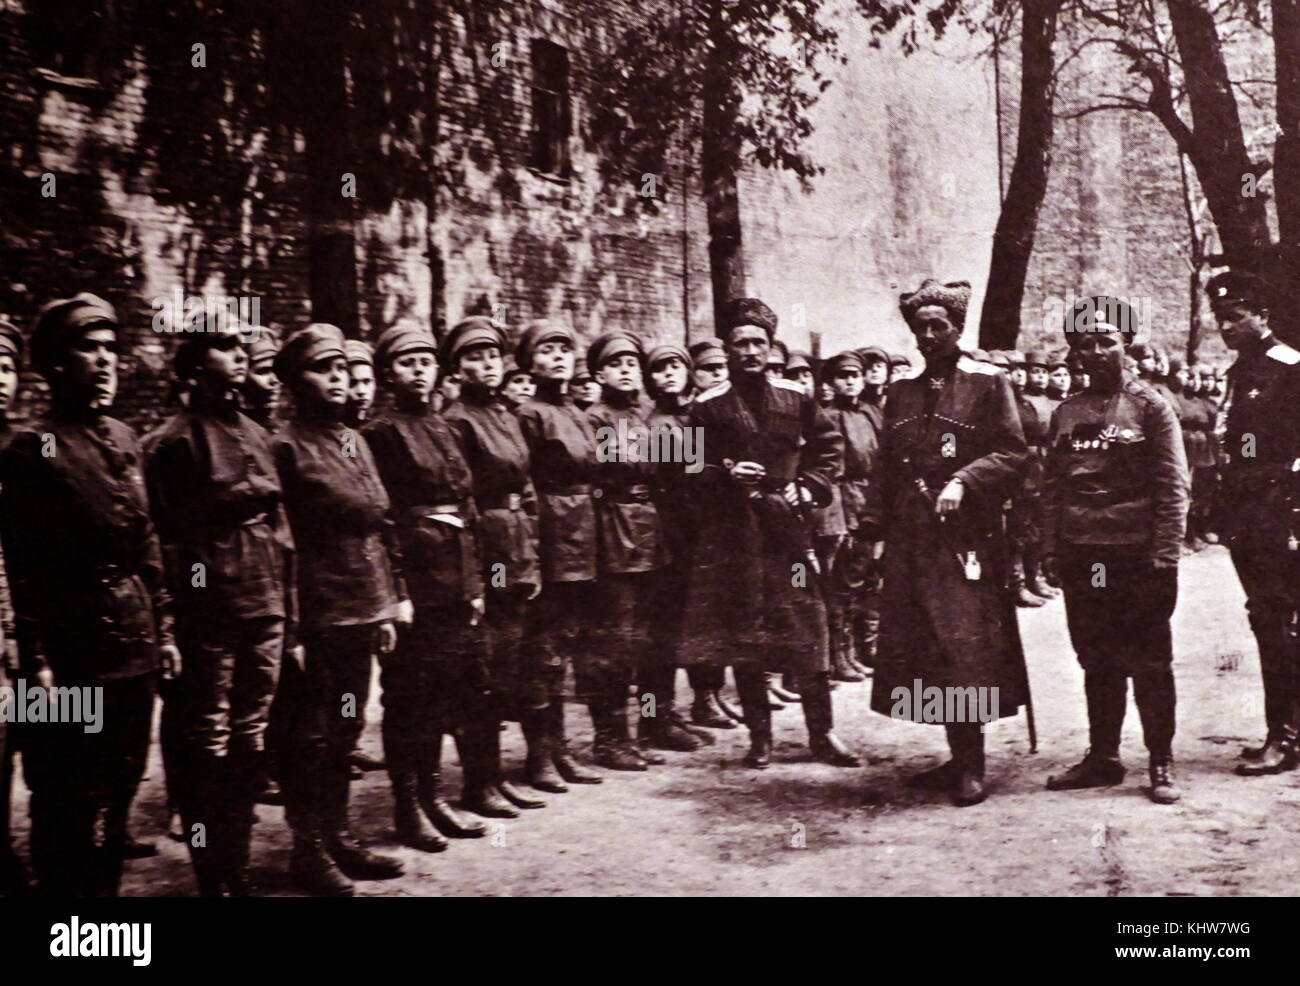 Photograph taken depicts two fur-hatted officers inspecting troops of the Women's Battalion, under the watchful eye of the unit's commander, Madame Botchkareva (second from right). Formed largely of war widows, the group supported Alexander Kerensky's government. Dated 20th Century Stock Photo